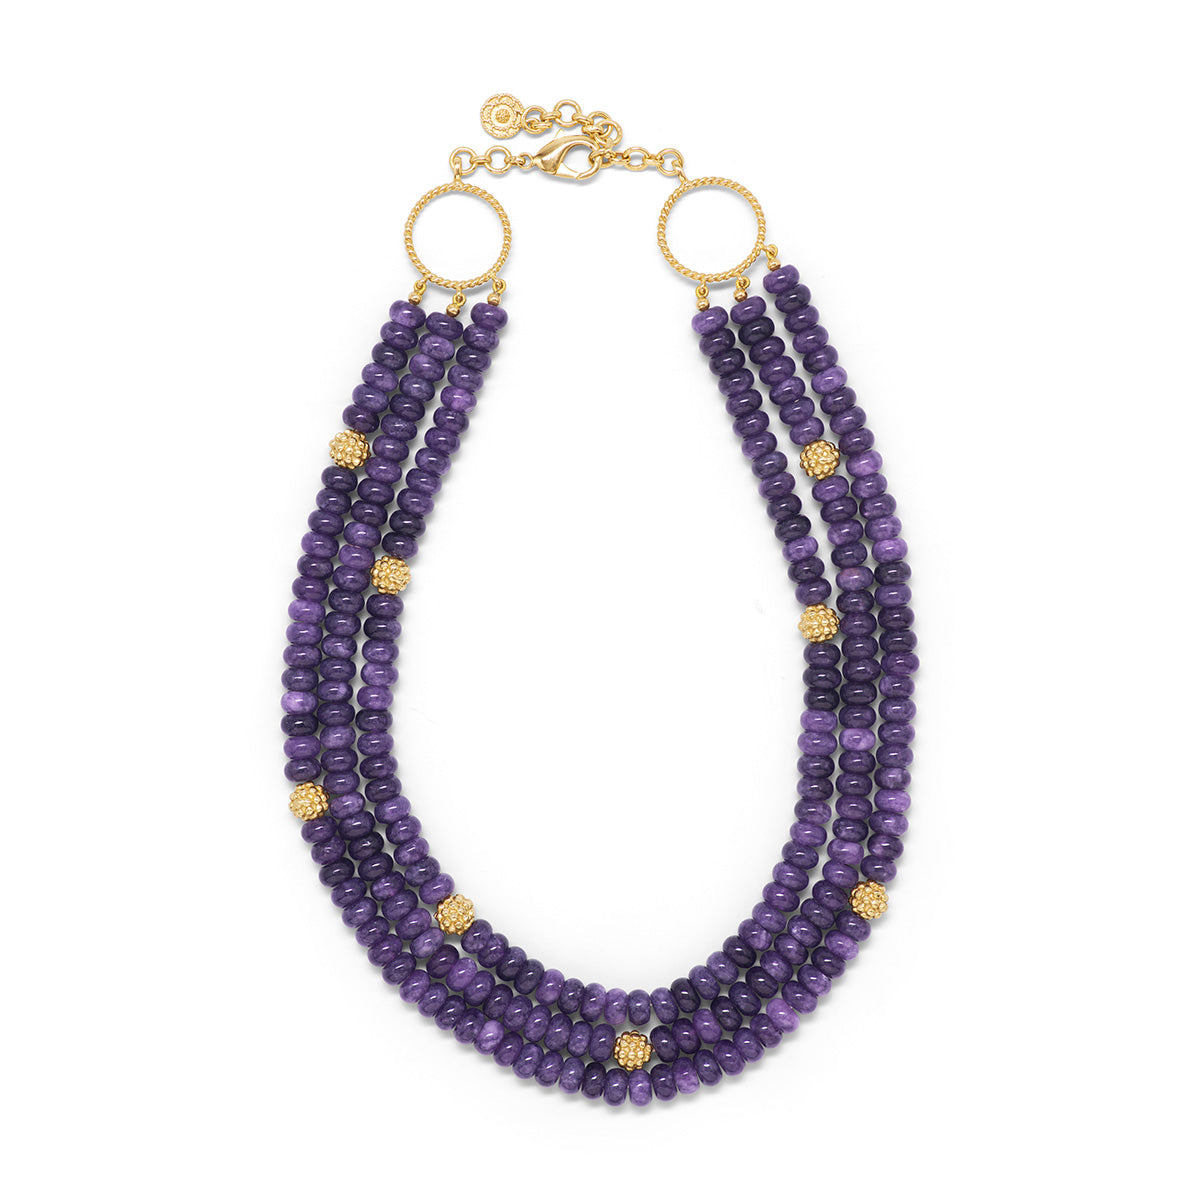 Berry & Bead Triple Strand Necklace w/ Violet Jade